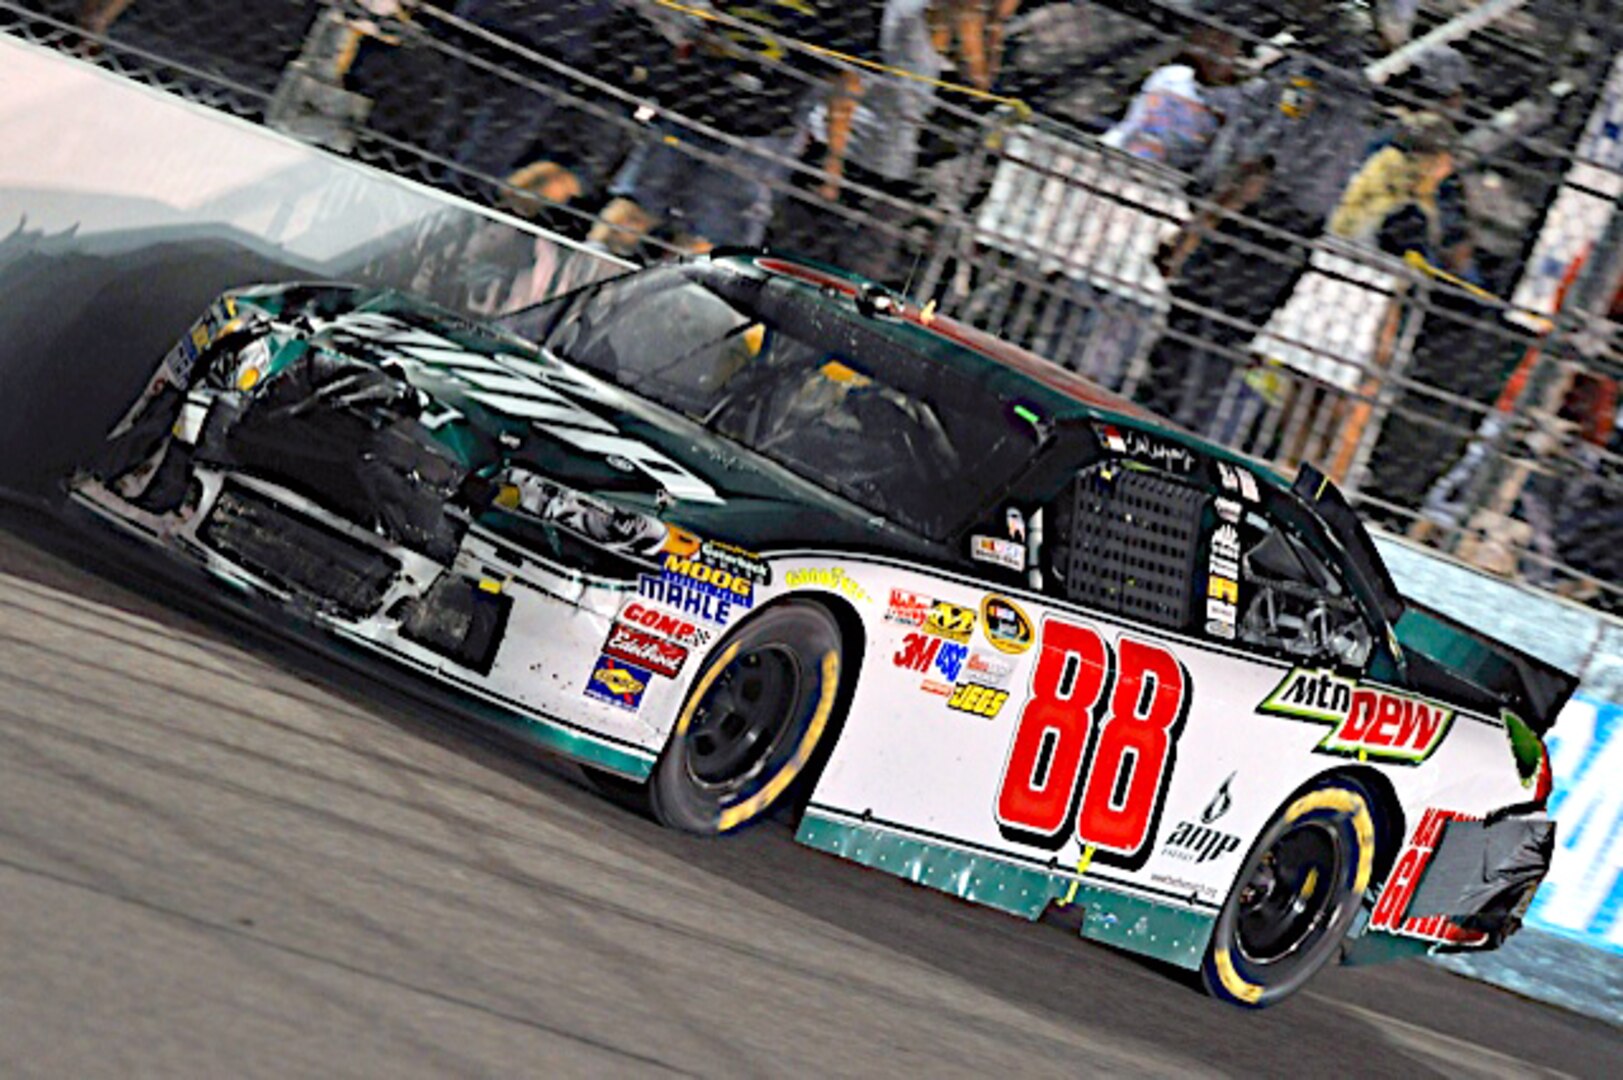 Dale Earnhardt Jr., driver of the No. 88 National Guard racecar, works his way around the track after being nudged by another competitor into an early turn-four accident at Richmond International Speedway, Sept. 10, 2011, in Richmond, Va. Earnhardt is locked into the 10th seed as the seasons best head into the post-season Chase for the Cup.